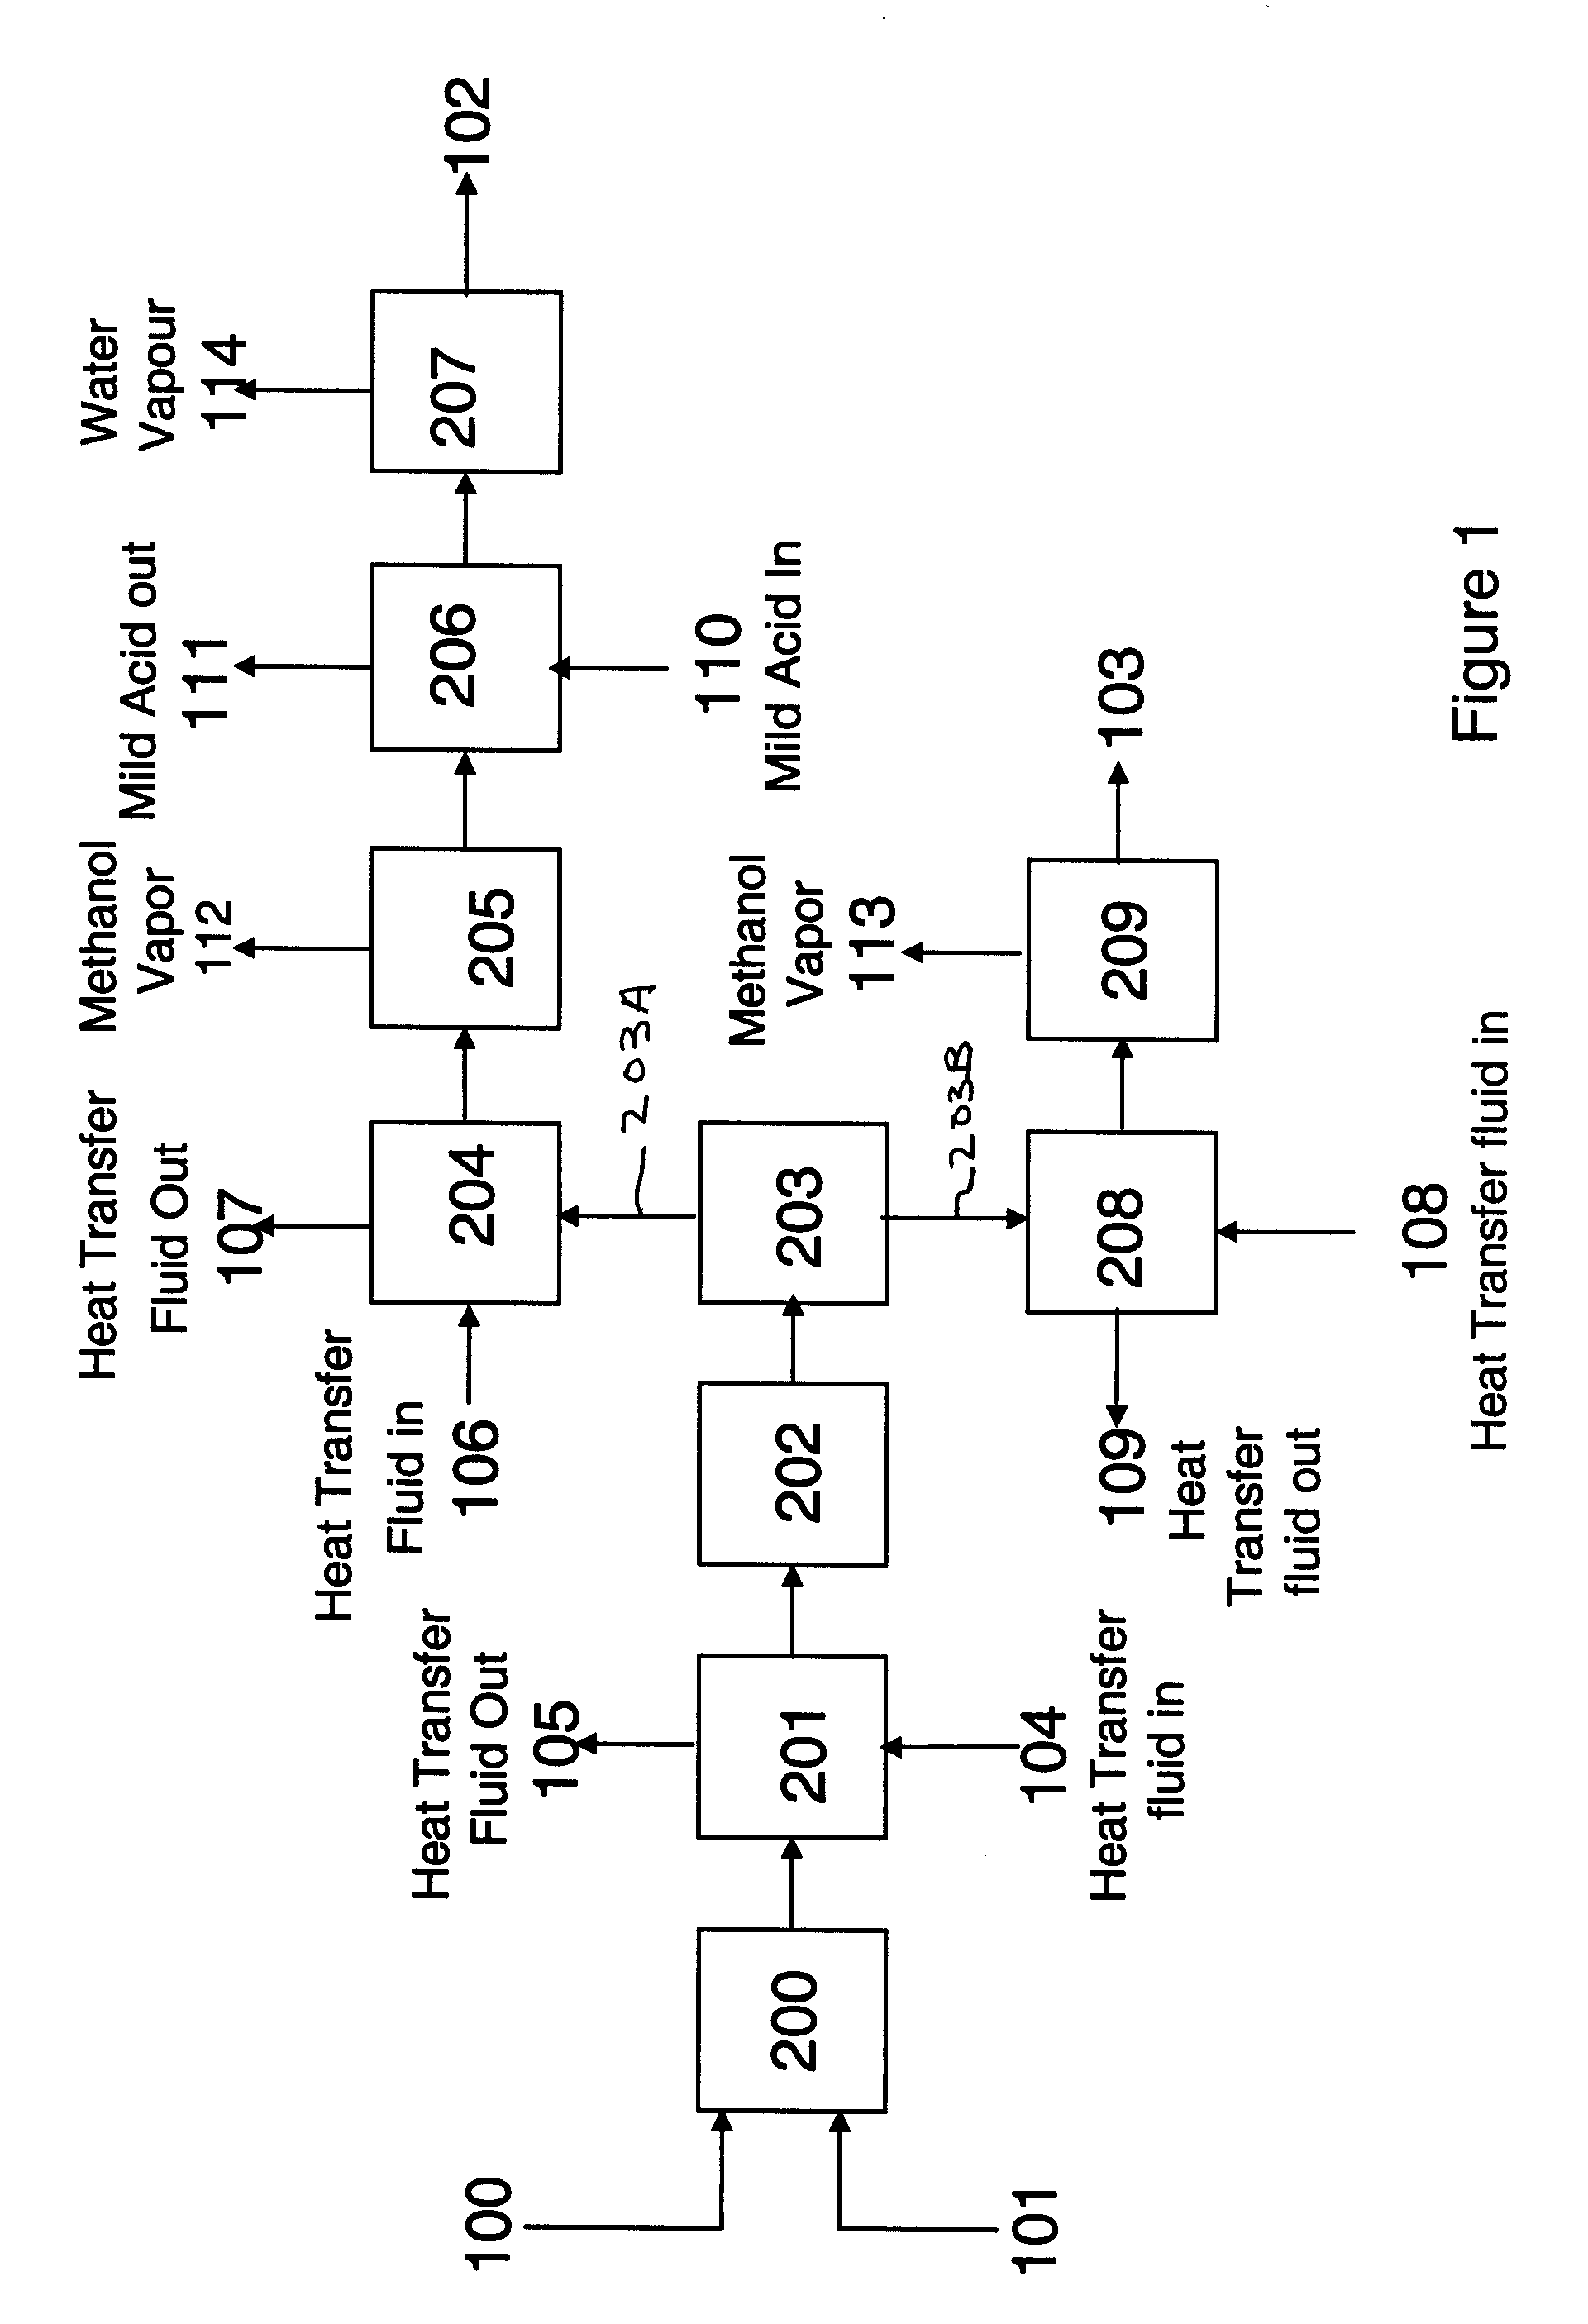 Method for continuous production of biodiesel fuel